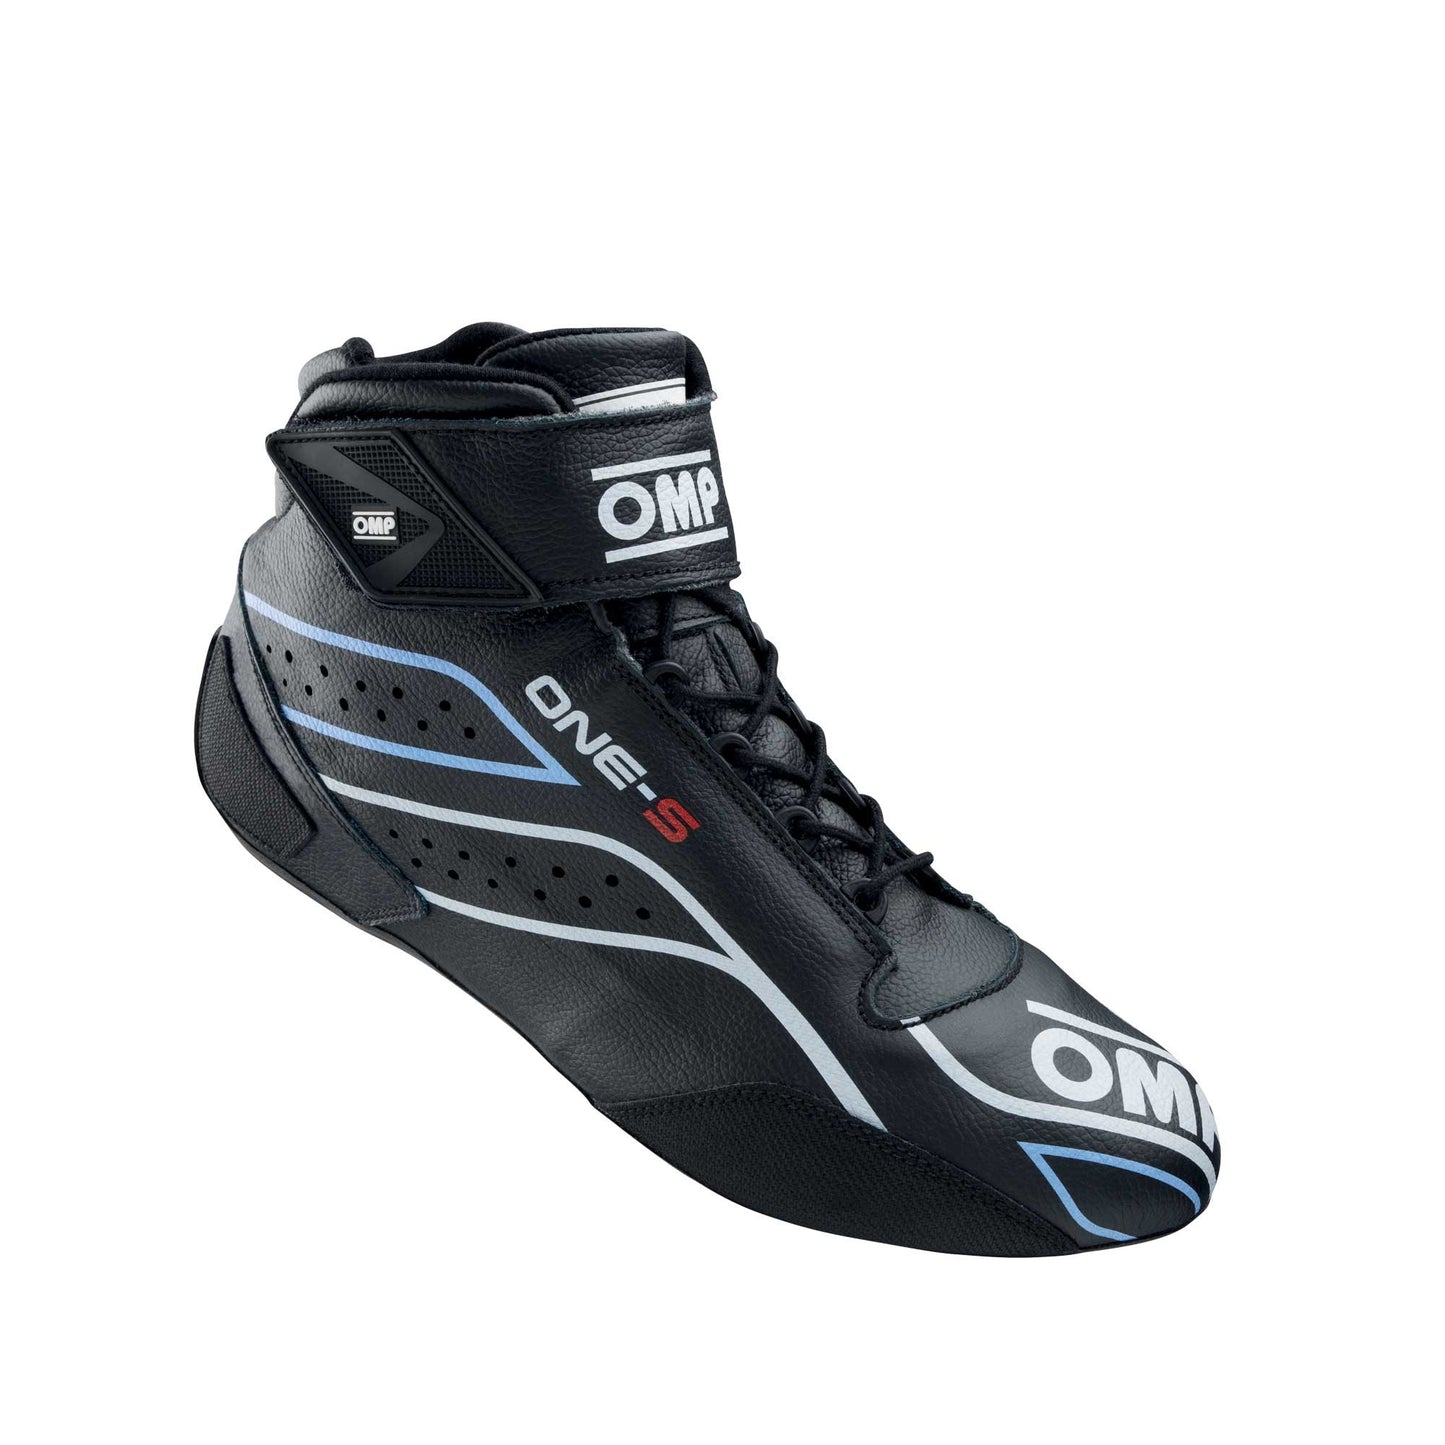 OMP Racing One-S(2020) Driving Shoes